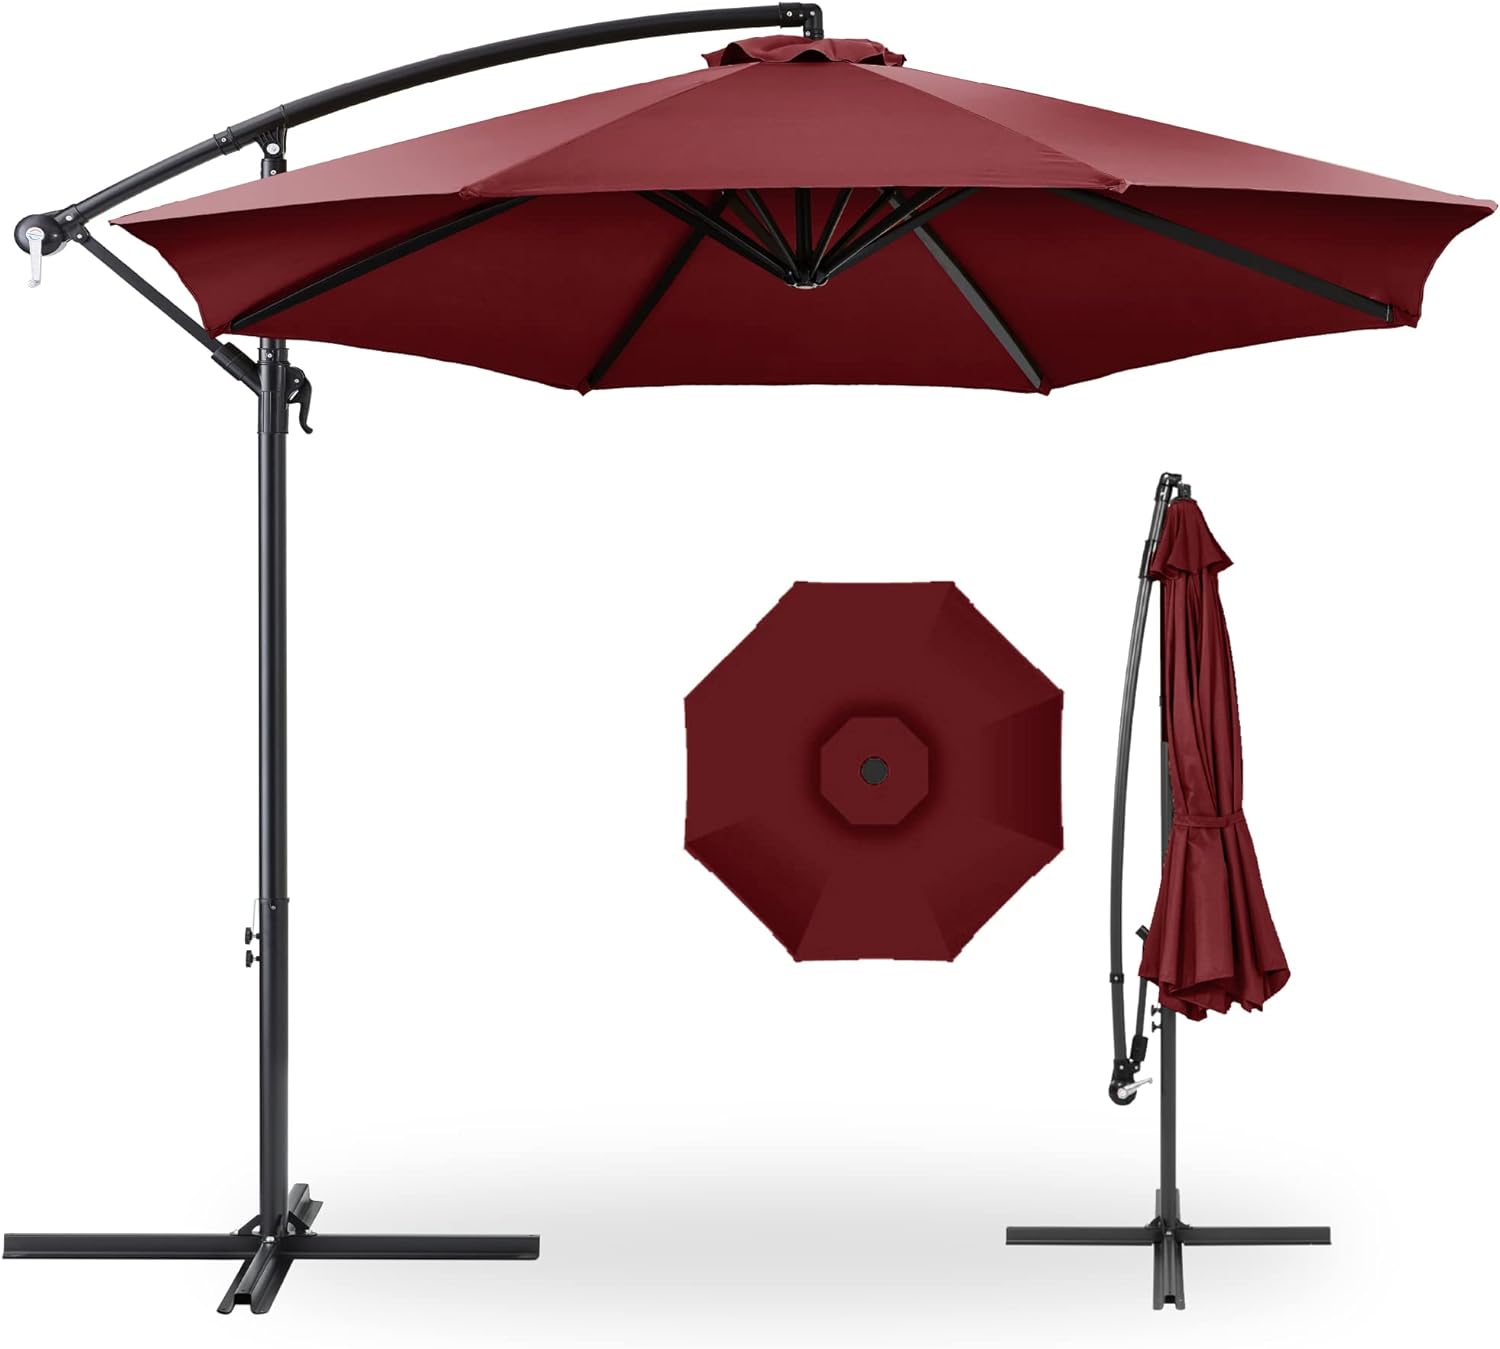 Best Parasol For Sun Protection